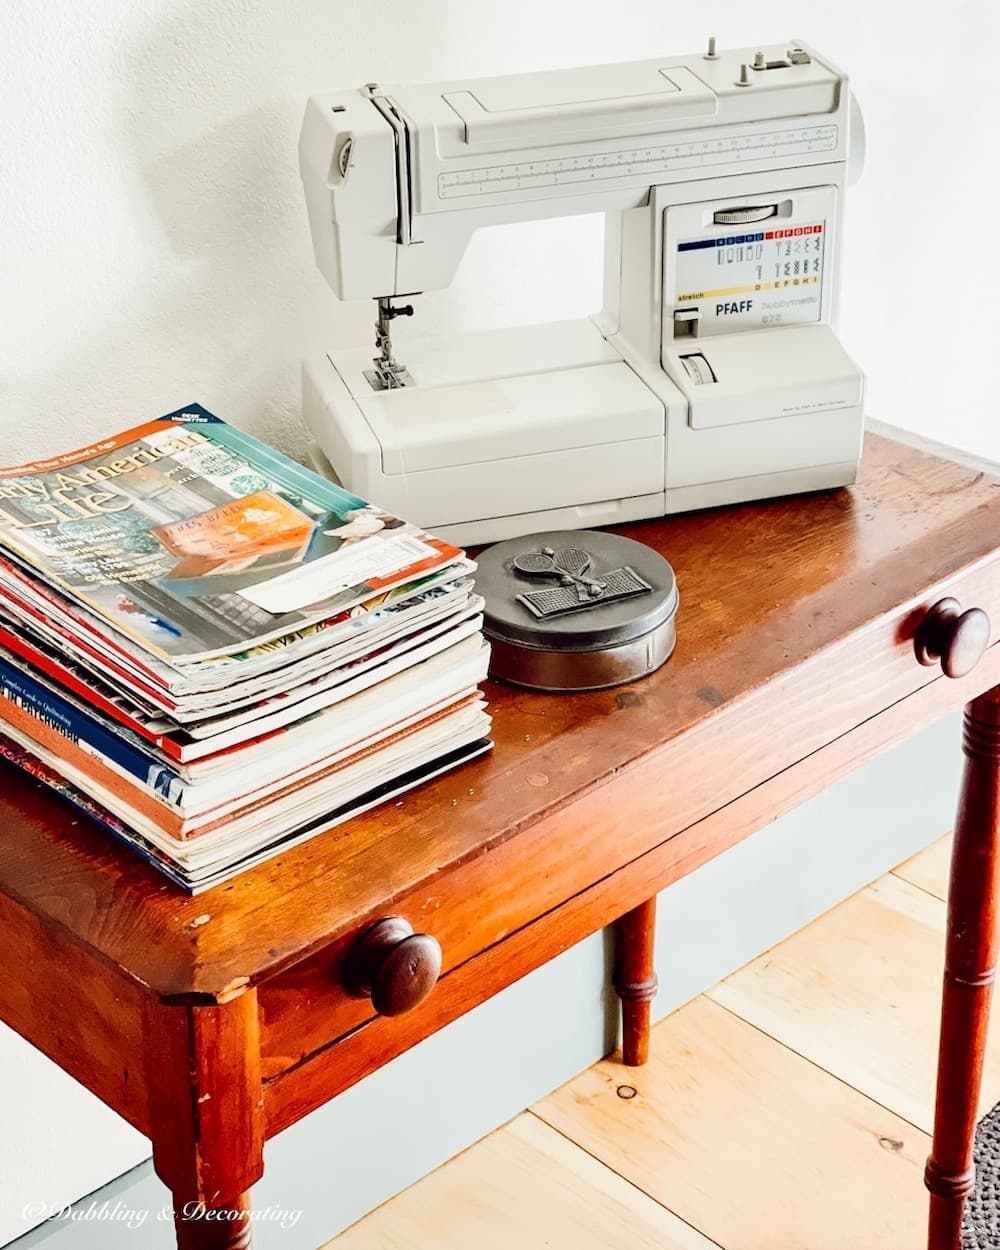 Sewing Machine on Table